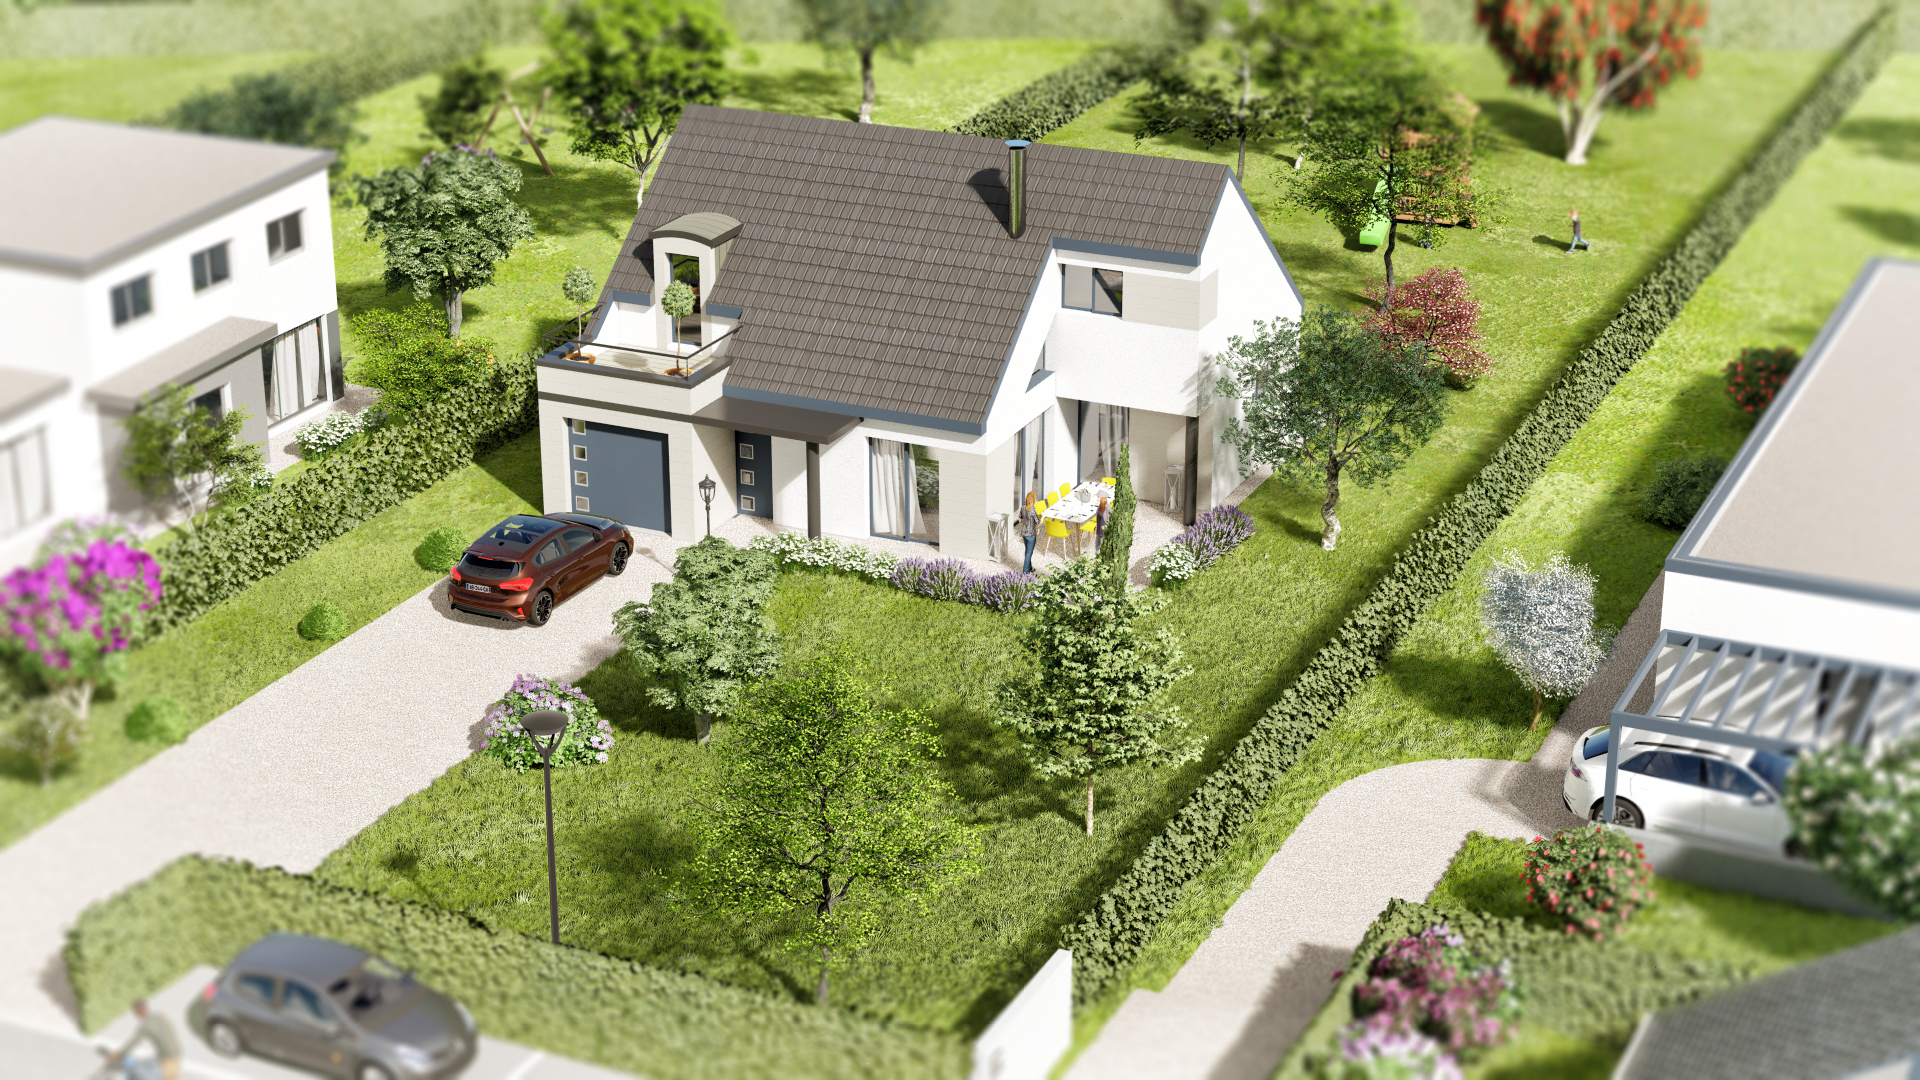 Programme immobilier neuf RESIDENCE BEL AIR